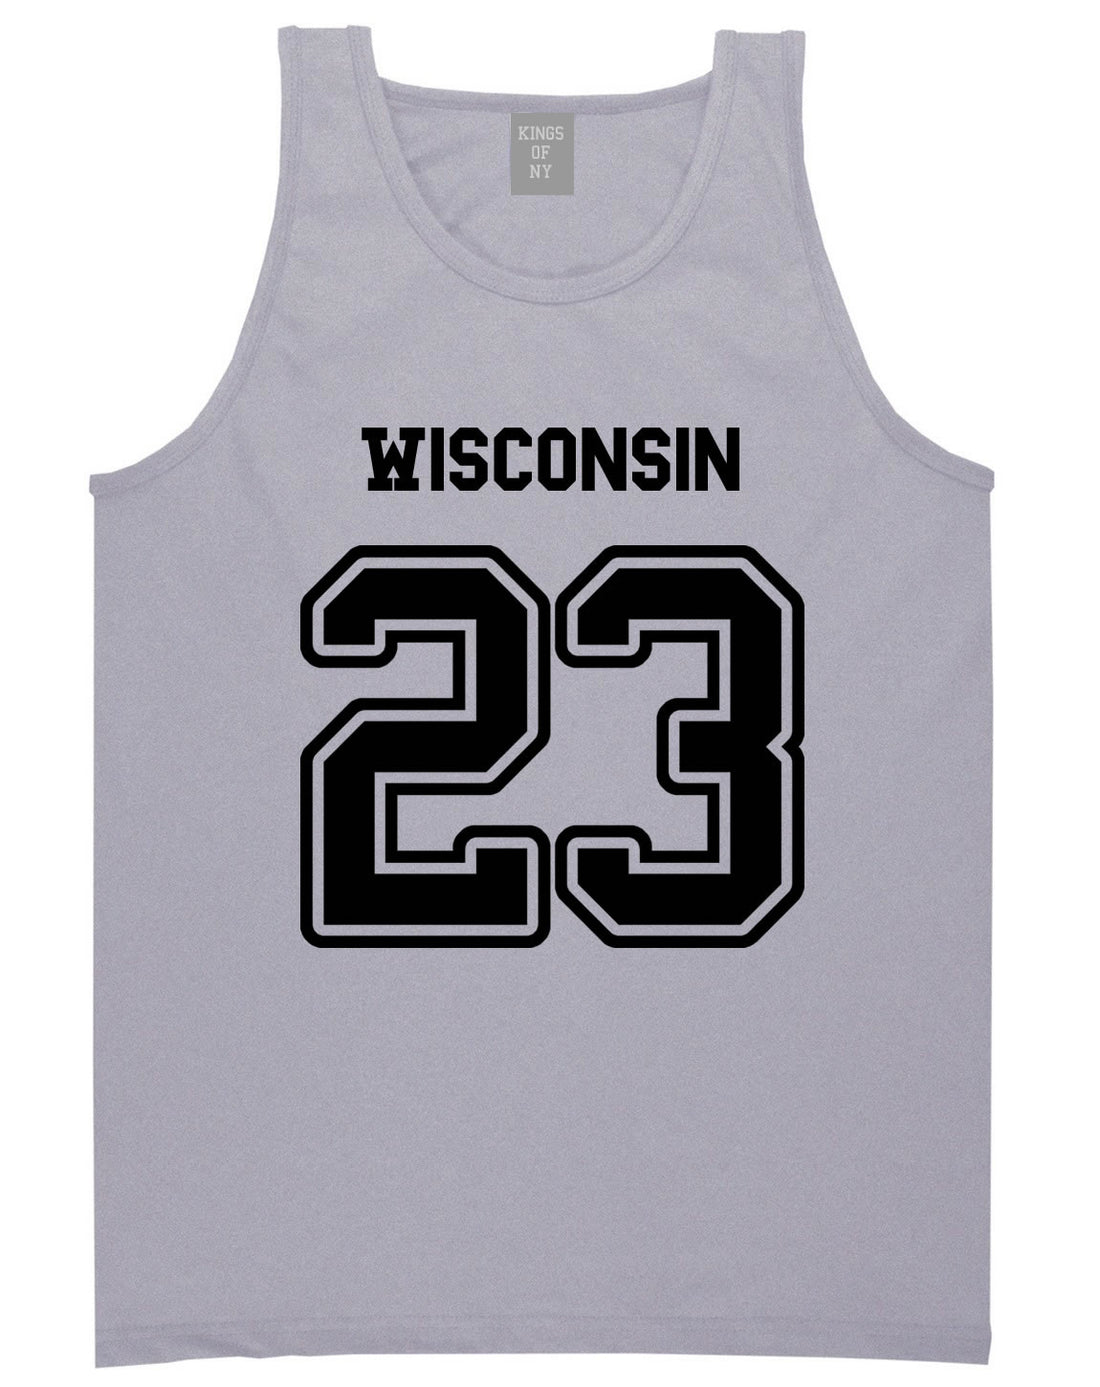 Sport Style Wisconsin 23 Team State Jersey Mens Tank Top By Kings Of NY